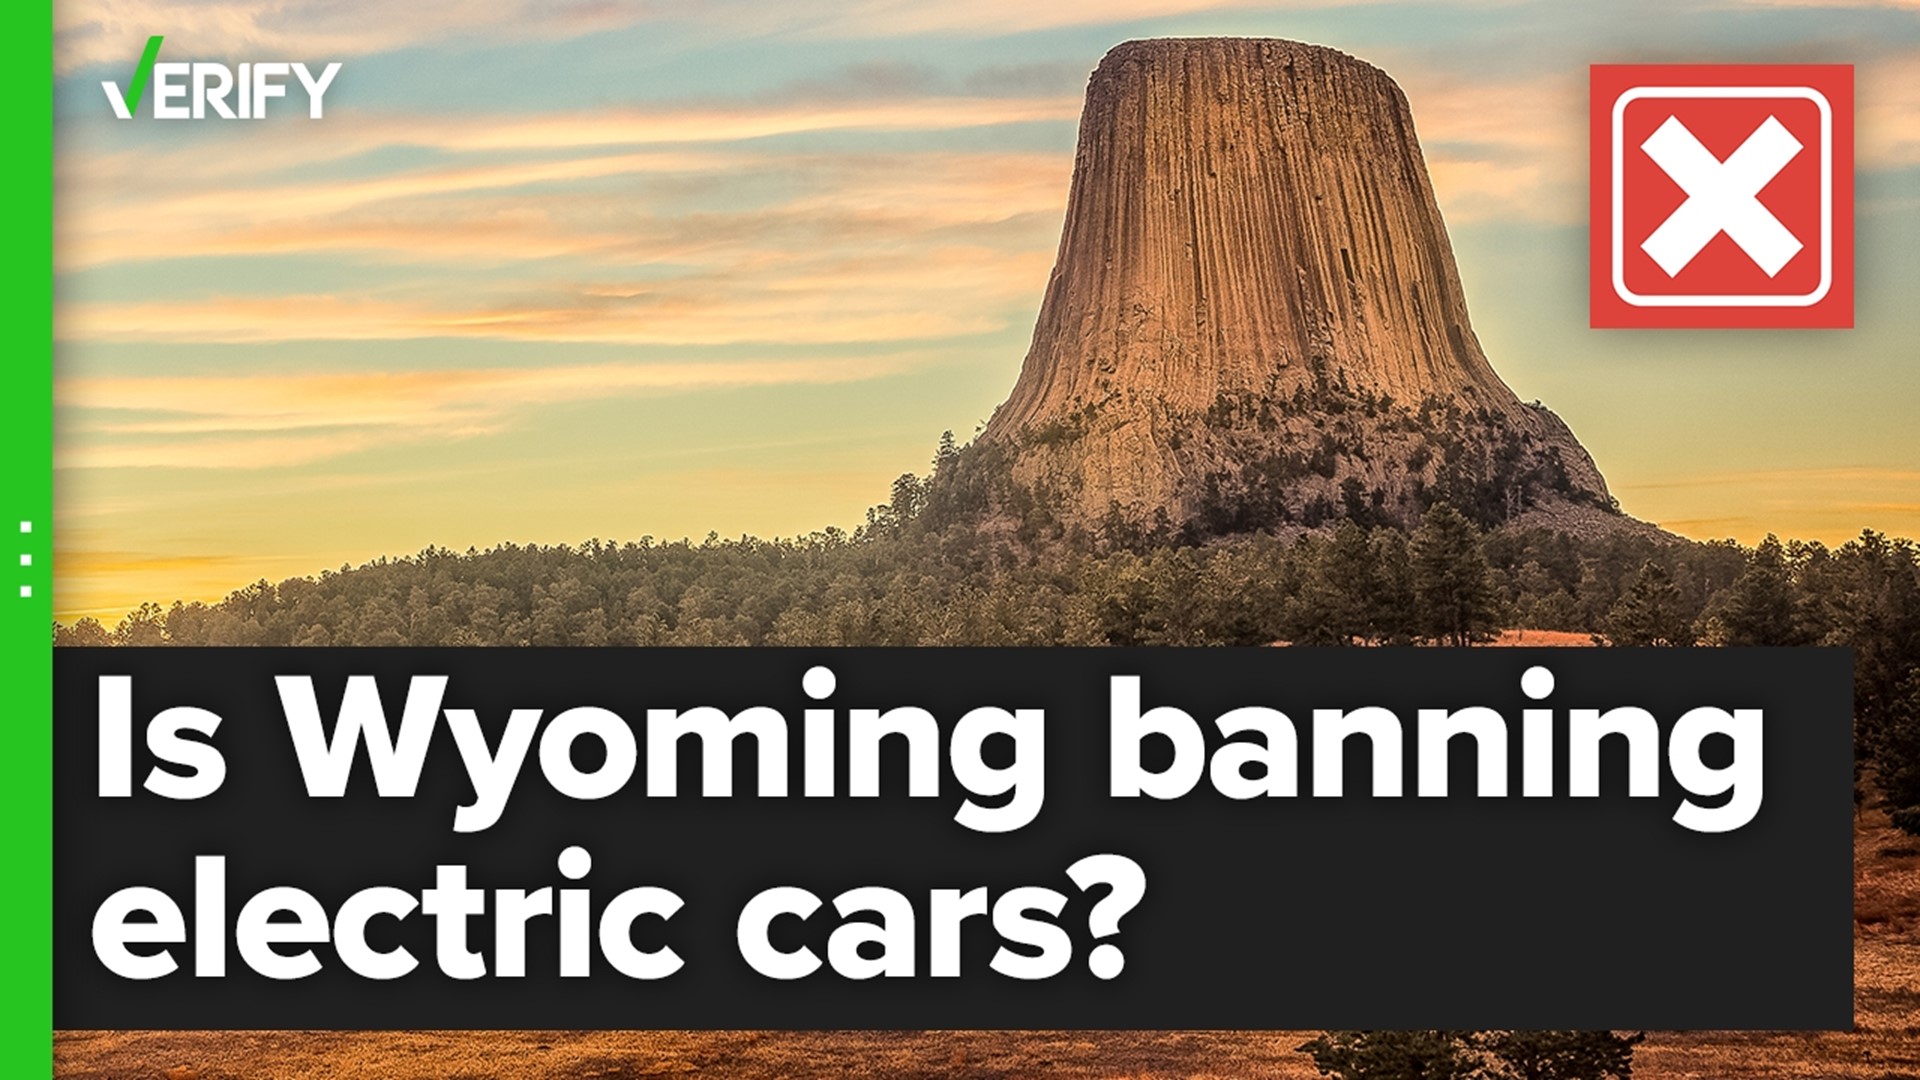 Wyoming state senators proposed a resolution to discourage the sale of electric cars, but it was not a ban and did not pass.